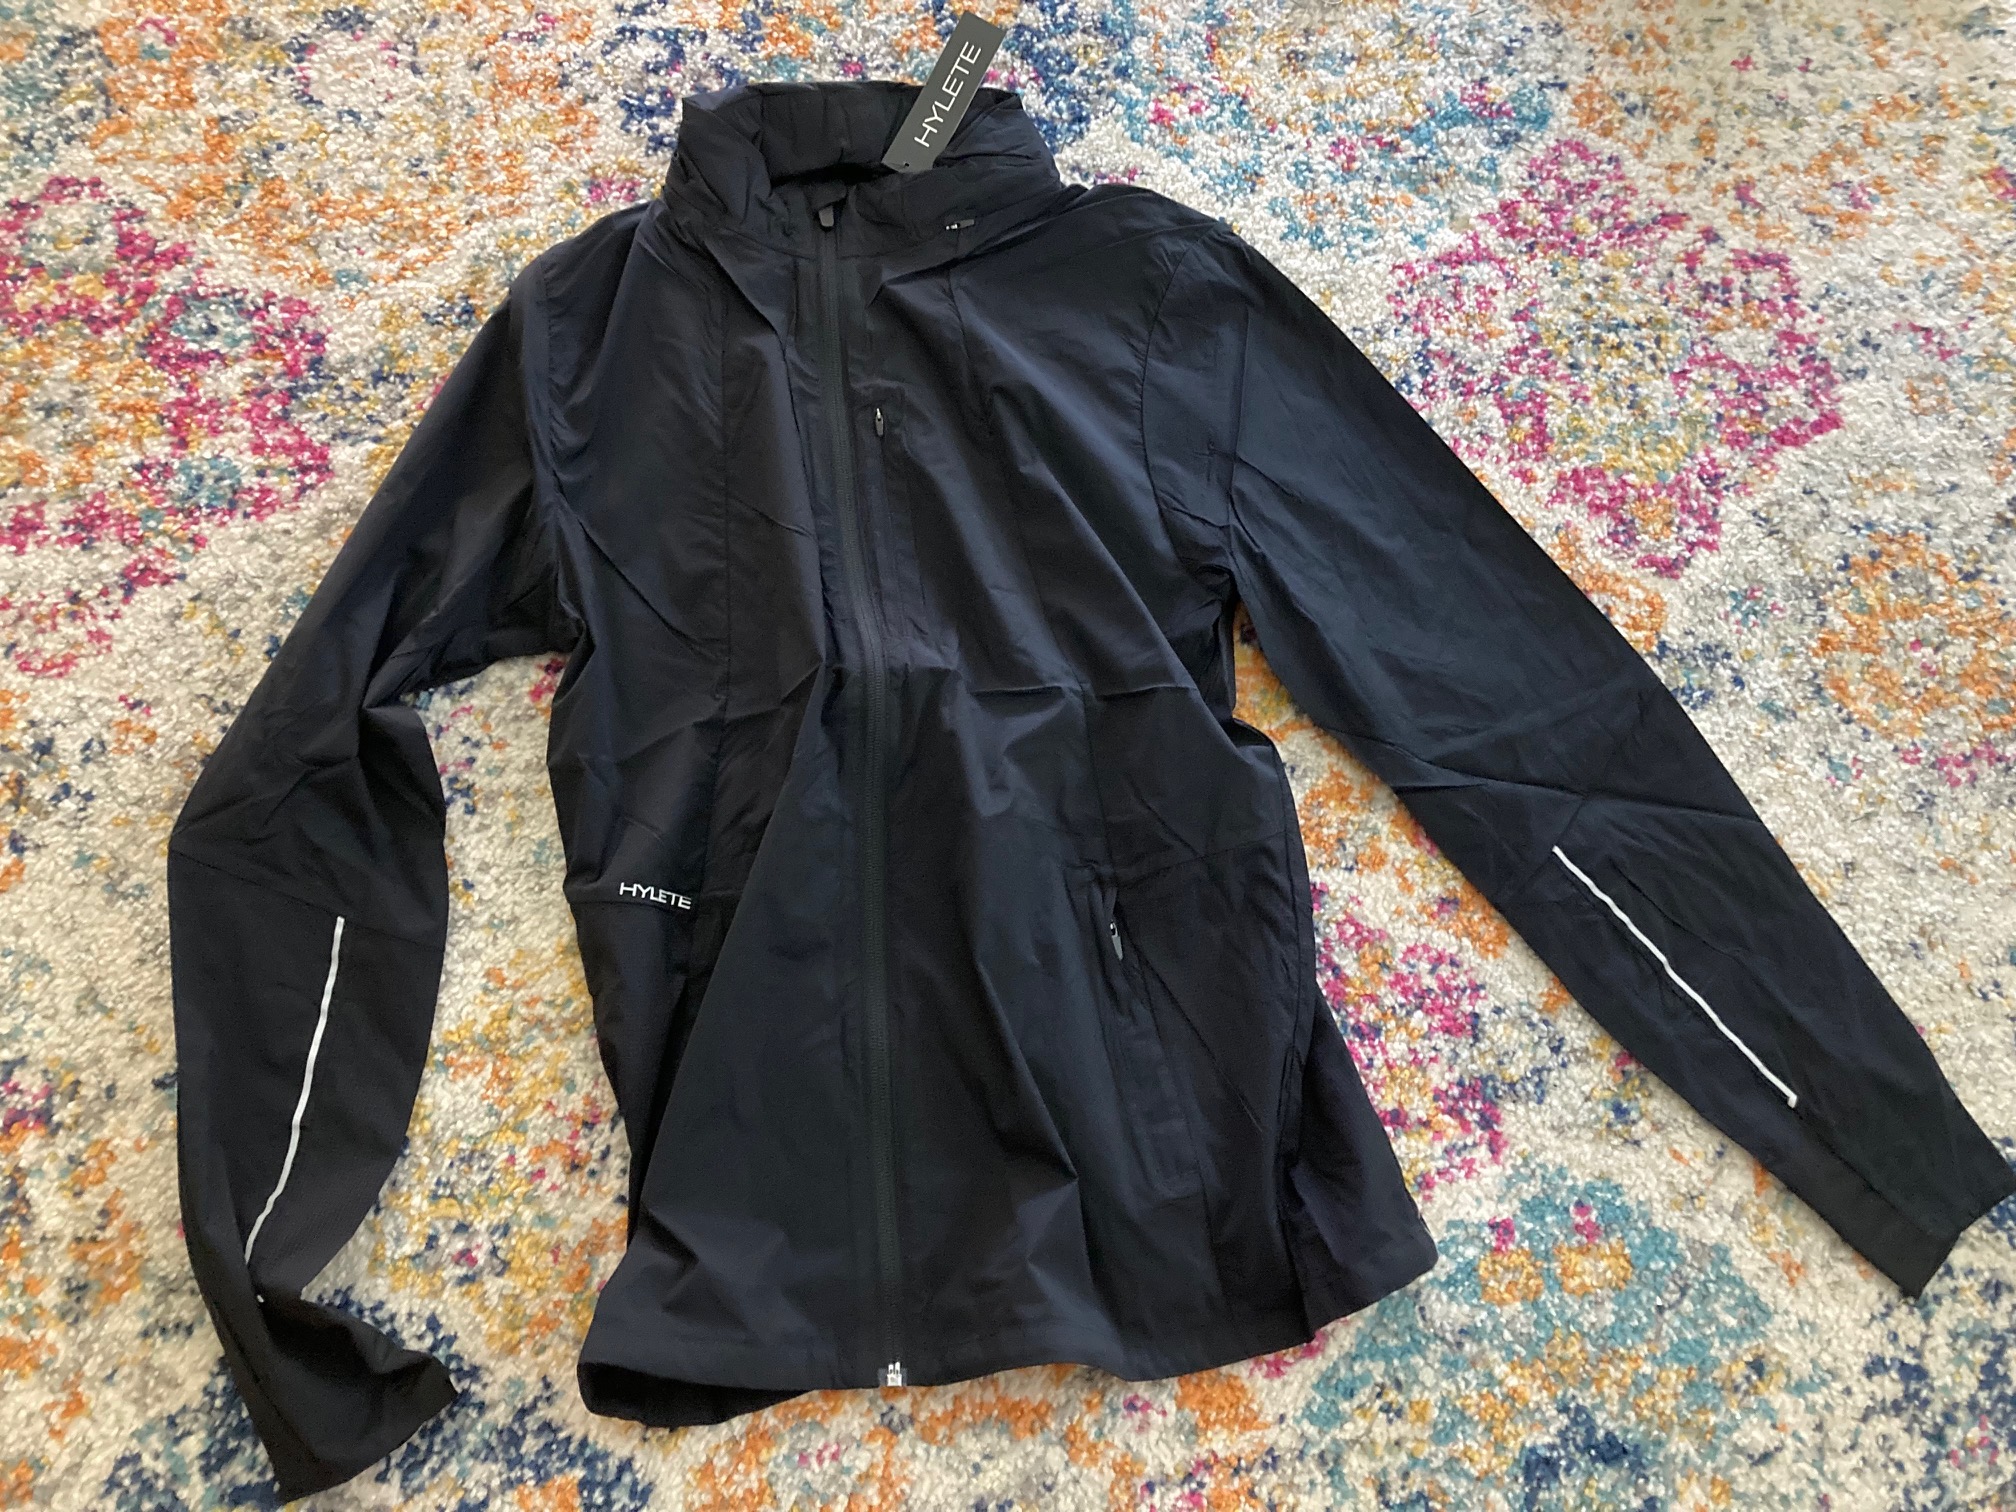 Gear Review: HYLETE Iso Shell Jacket - OCR Buddy